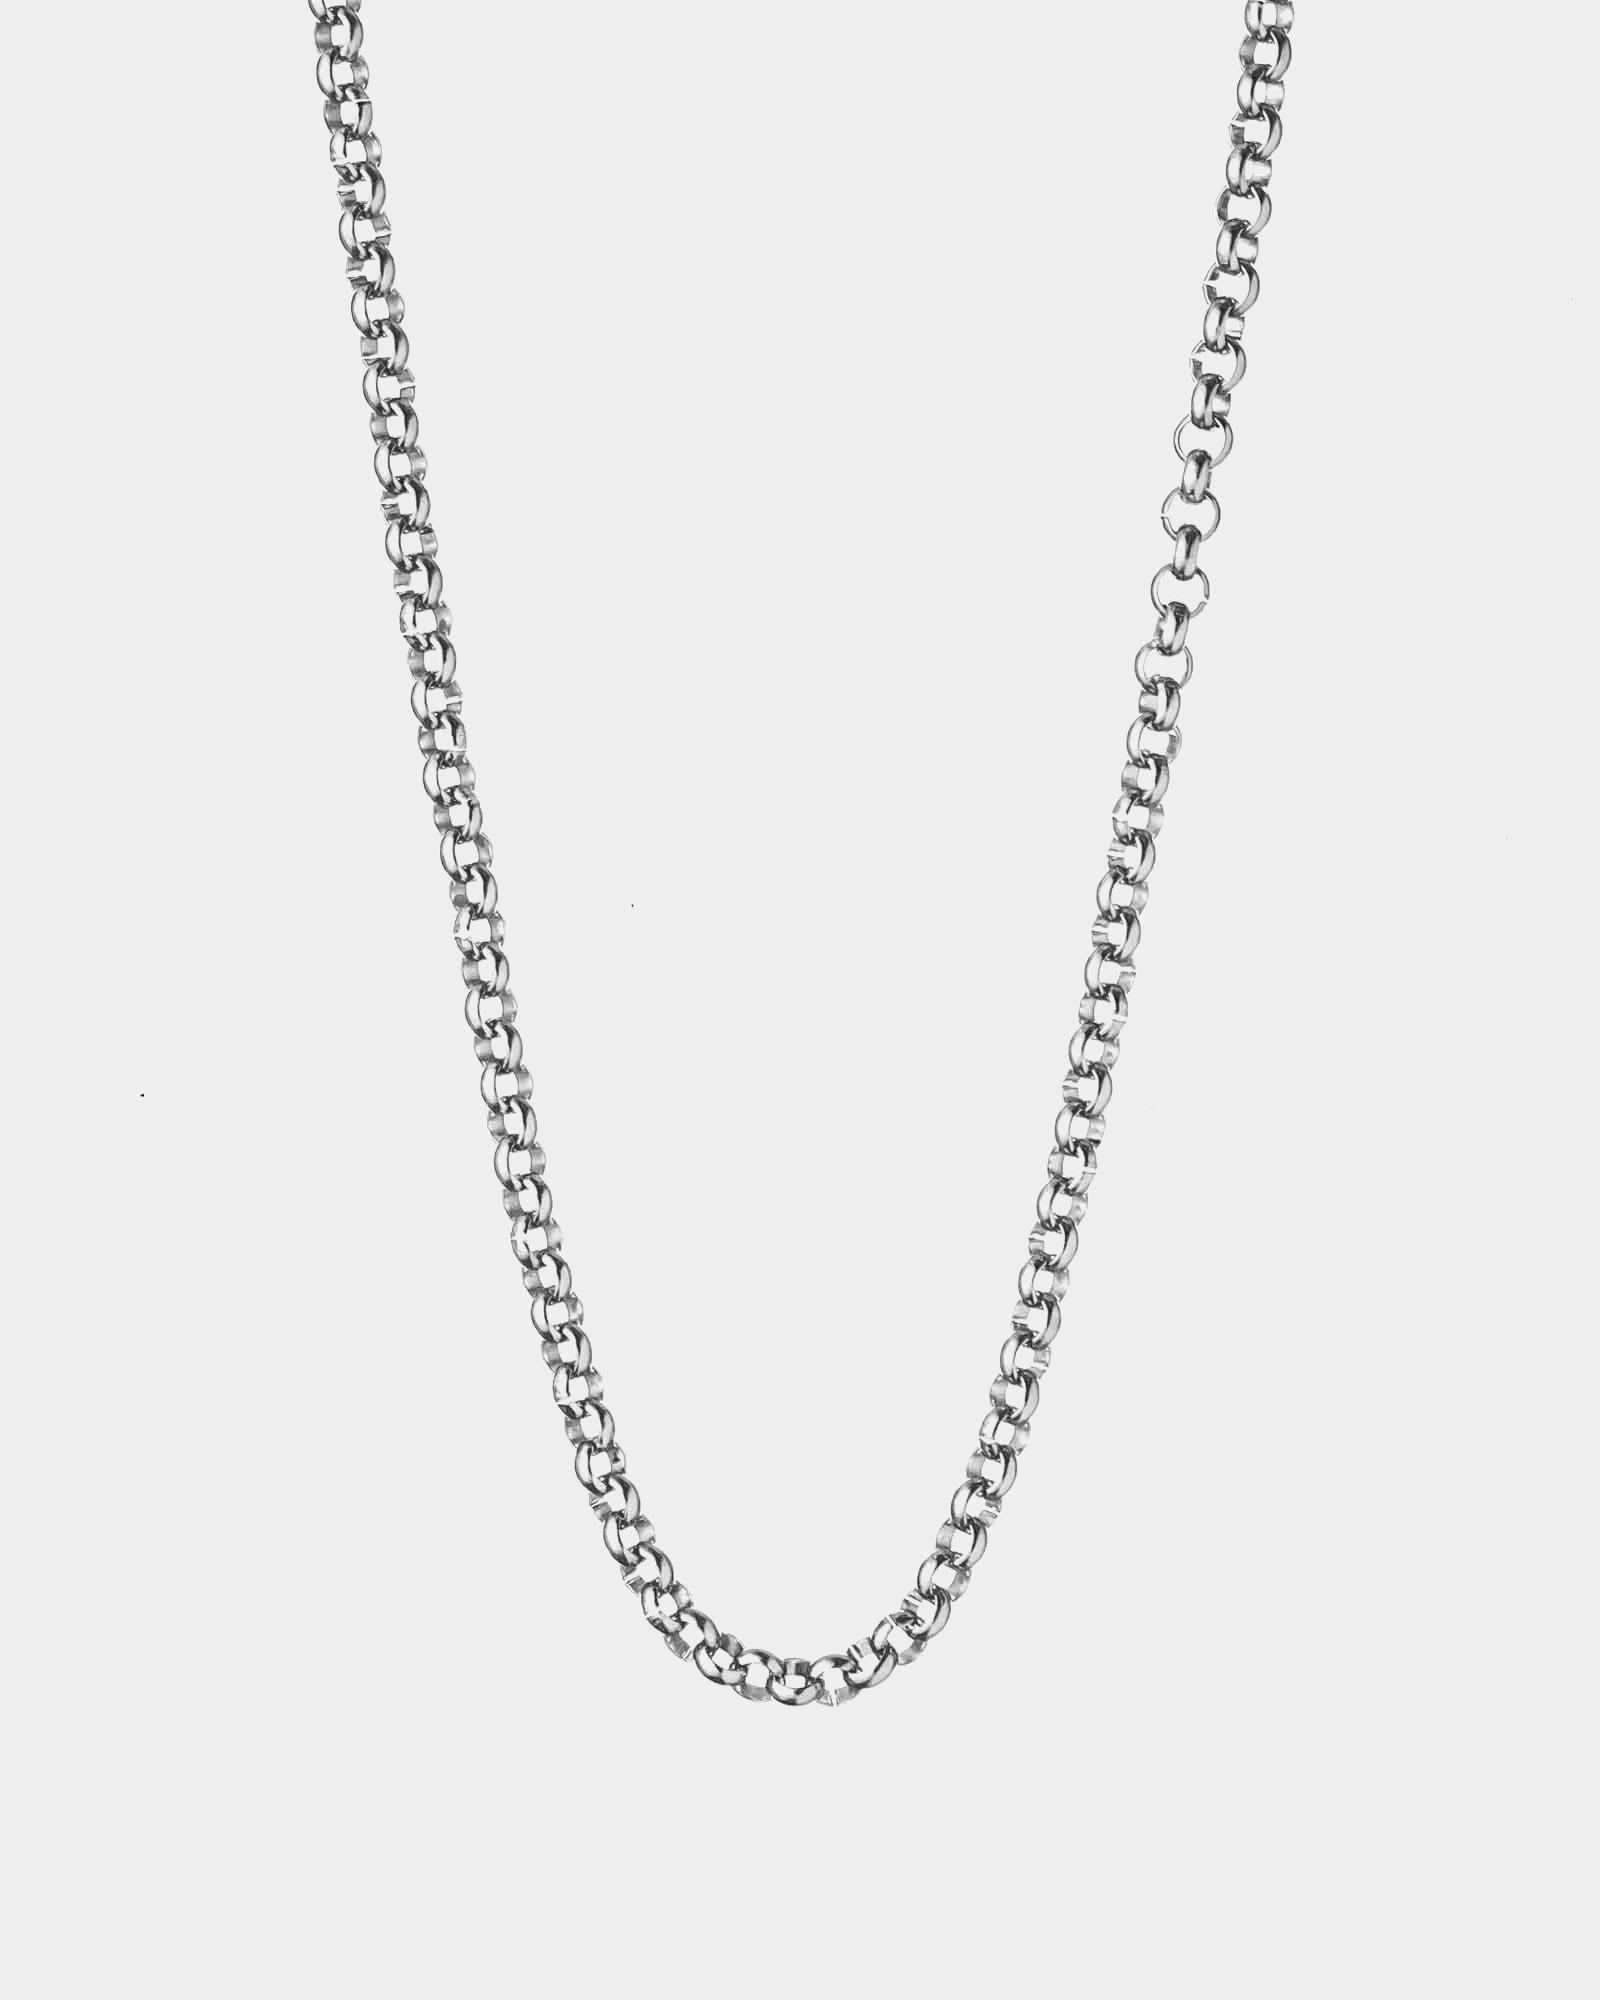 Stainless Steel Snake Chain | 1.5mm and 2.4mm | 20